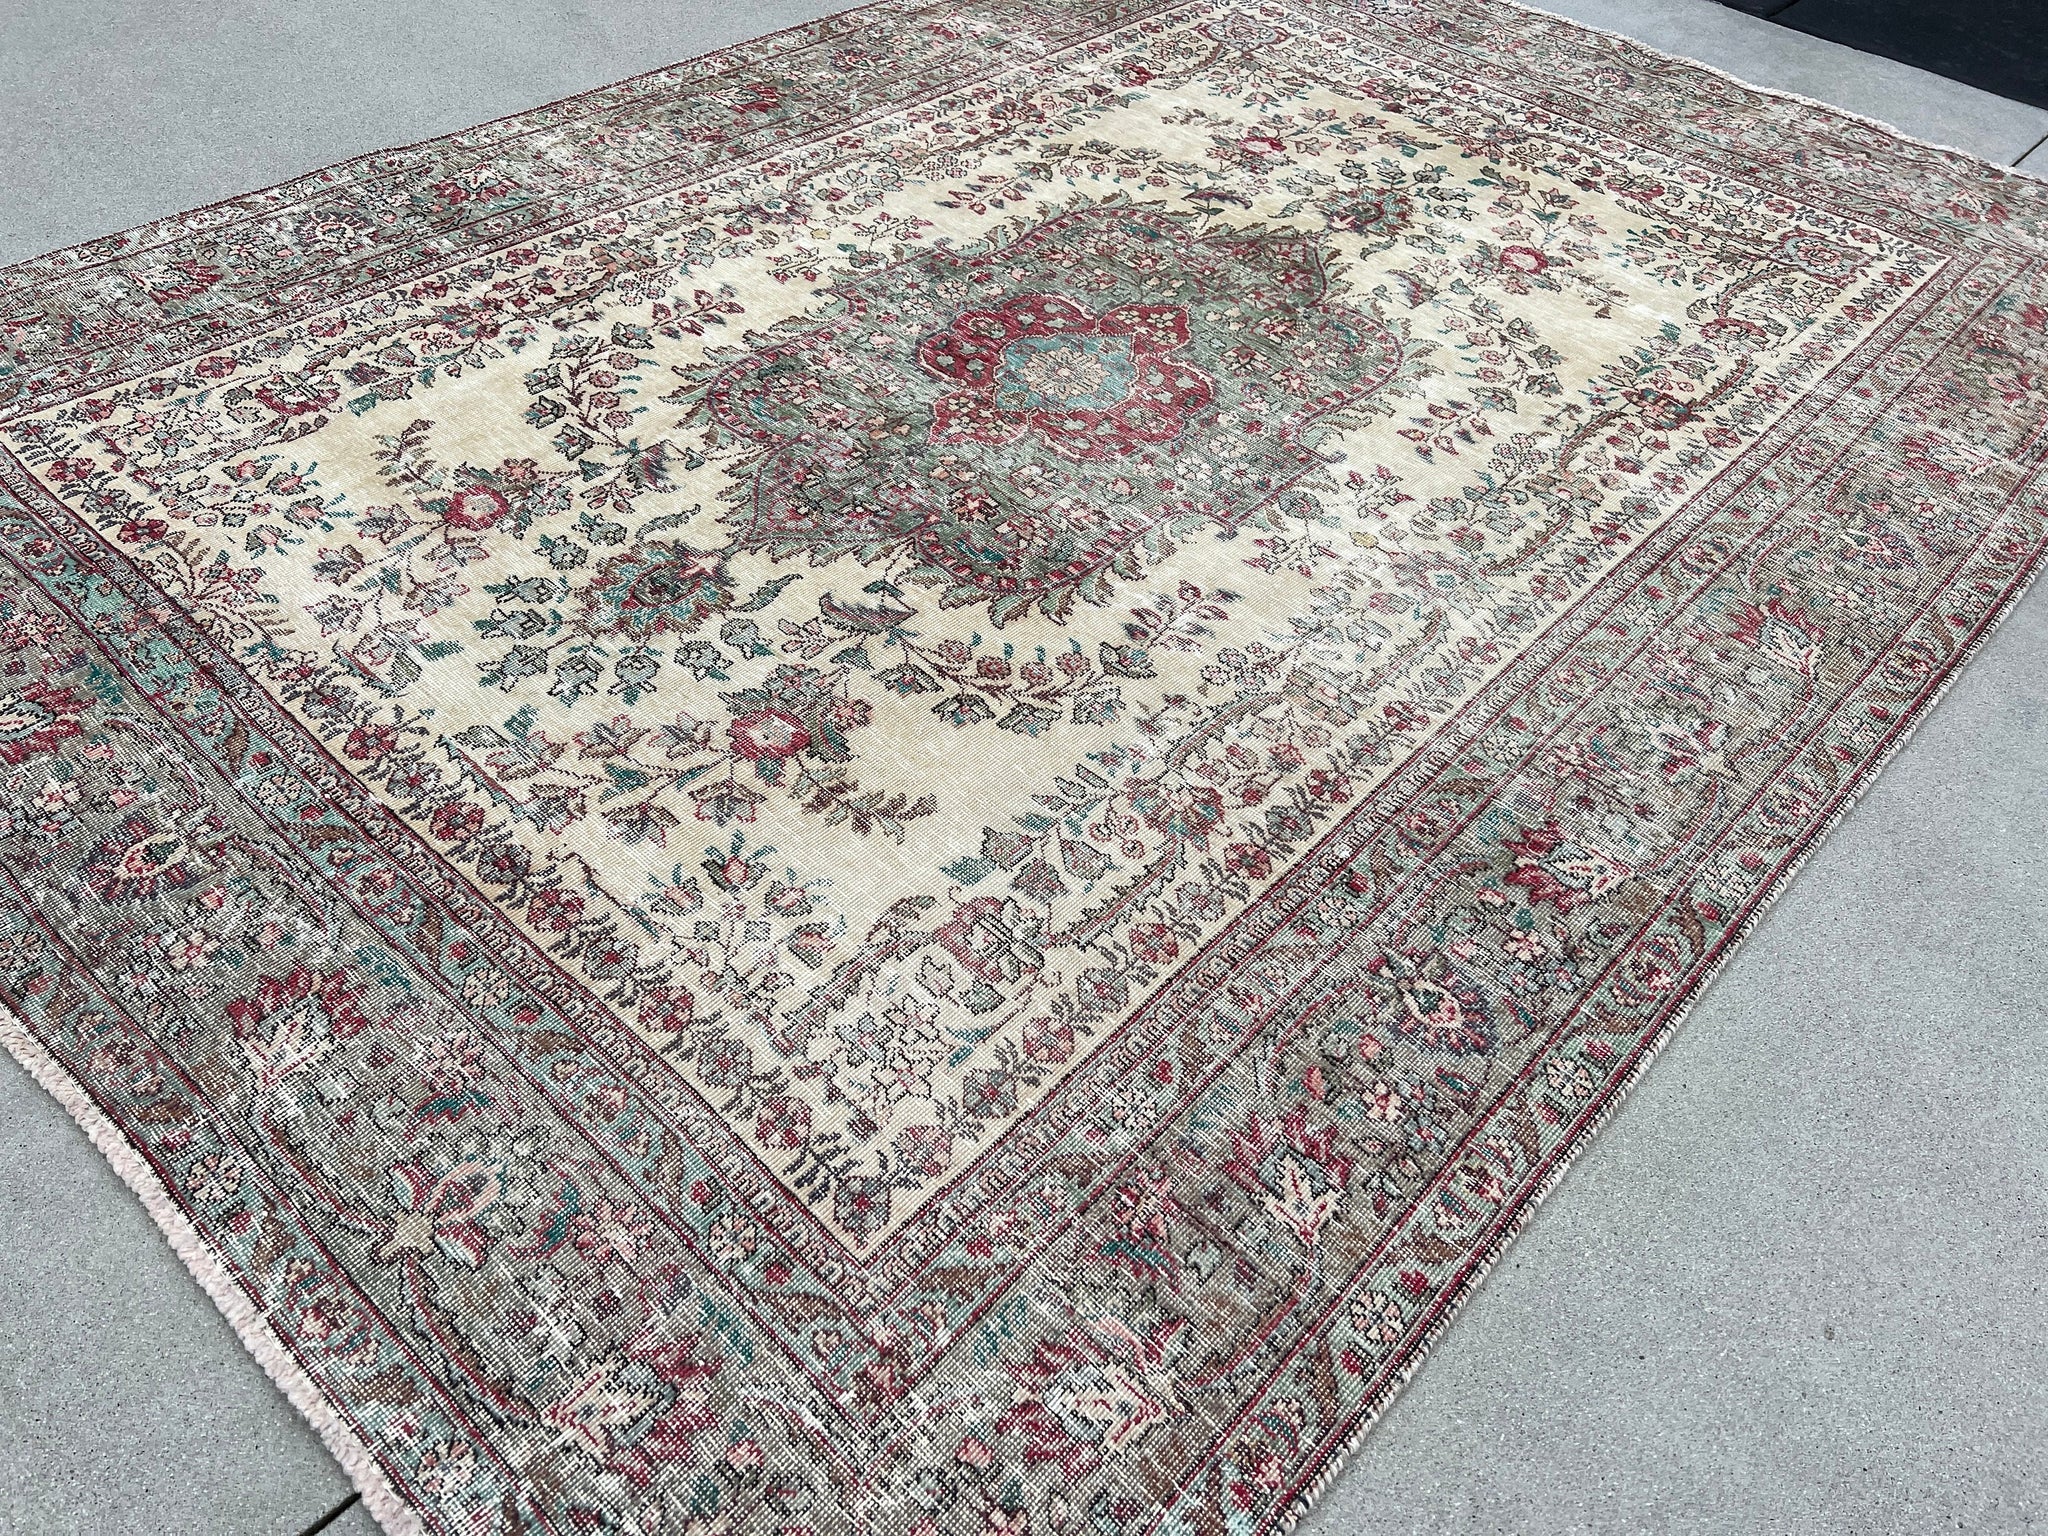 6x9 Classic Vintage Handmade Wool Area Rug | Beige Olive Green Teal Red Light Blue Ivory Dirty White | Knotted Oushak Persian Distressed